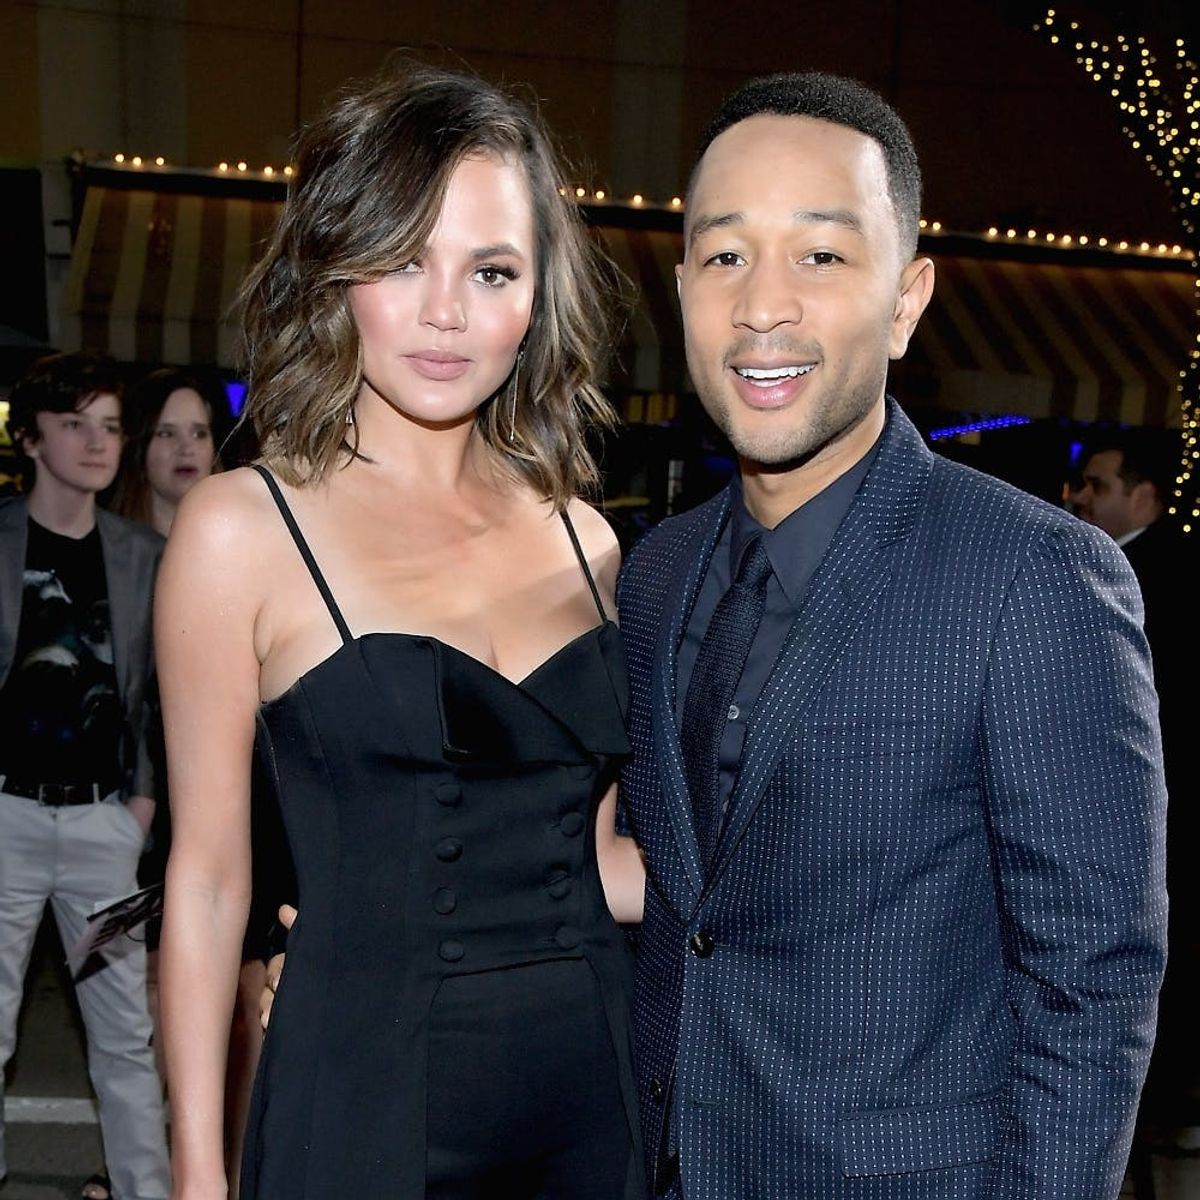 John Legend Had Something Unexpected to Say About Chrissy Teigen’s Postpartum Depression